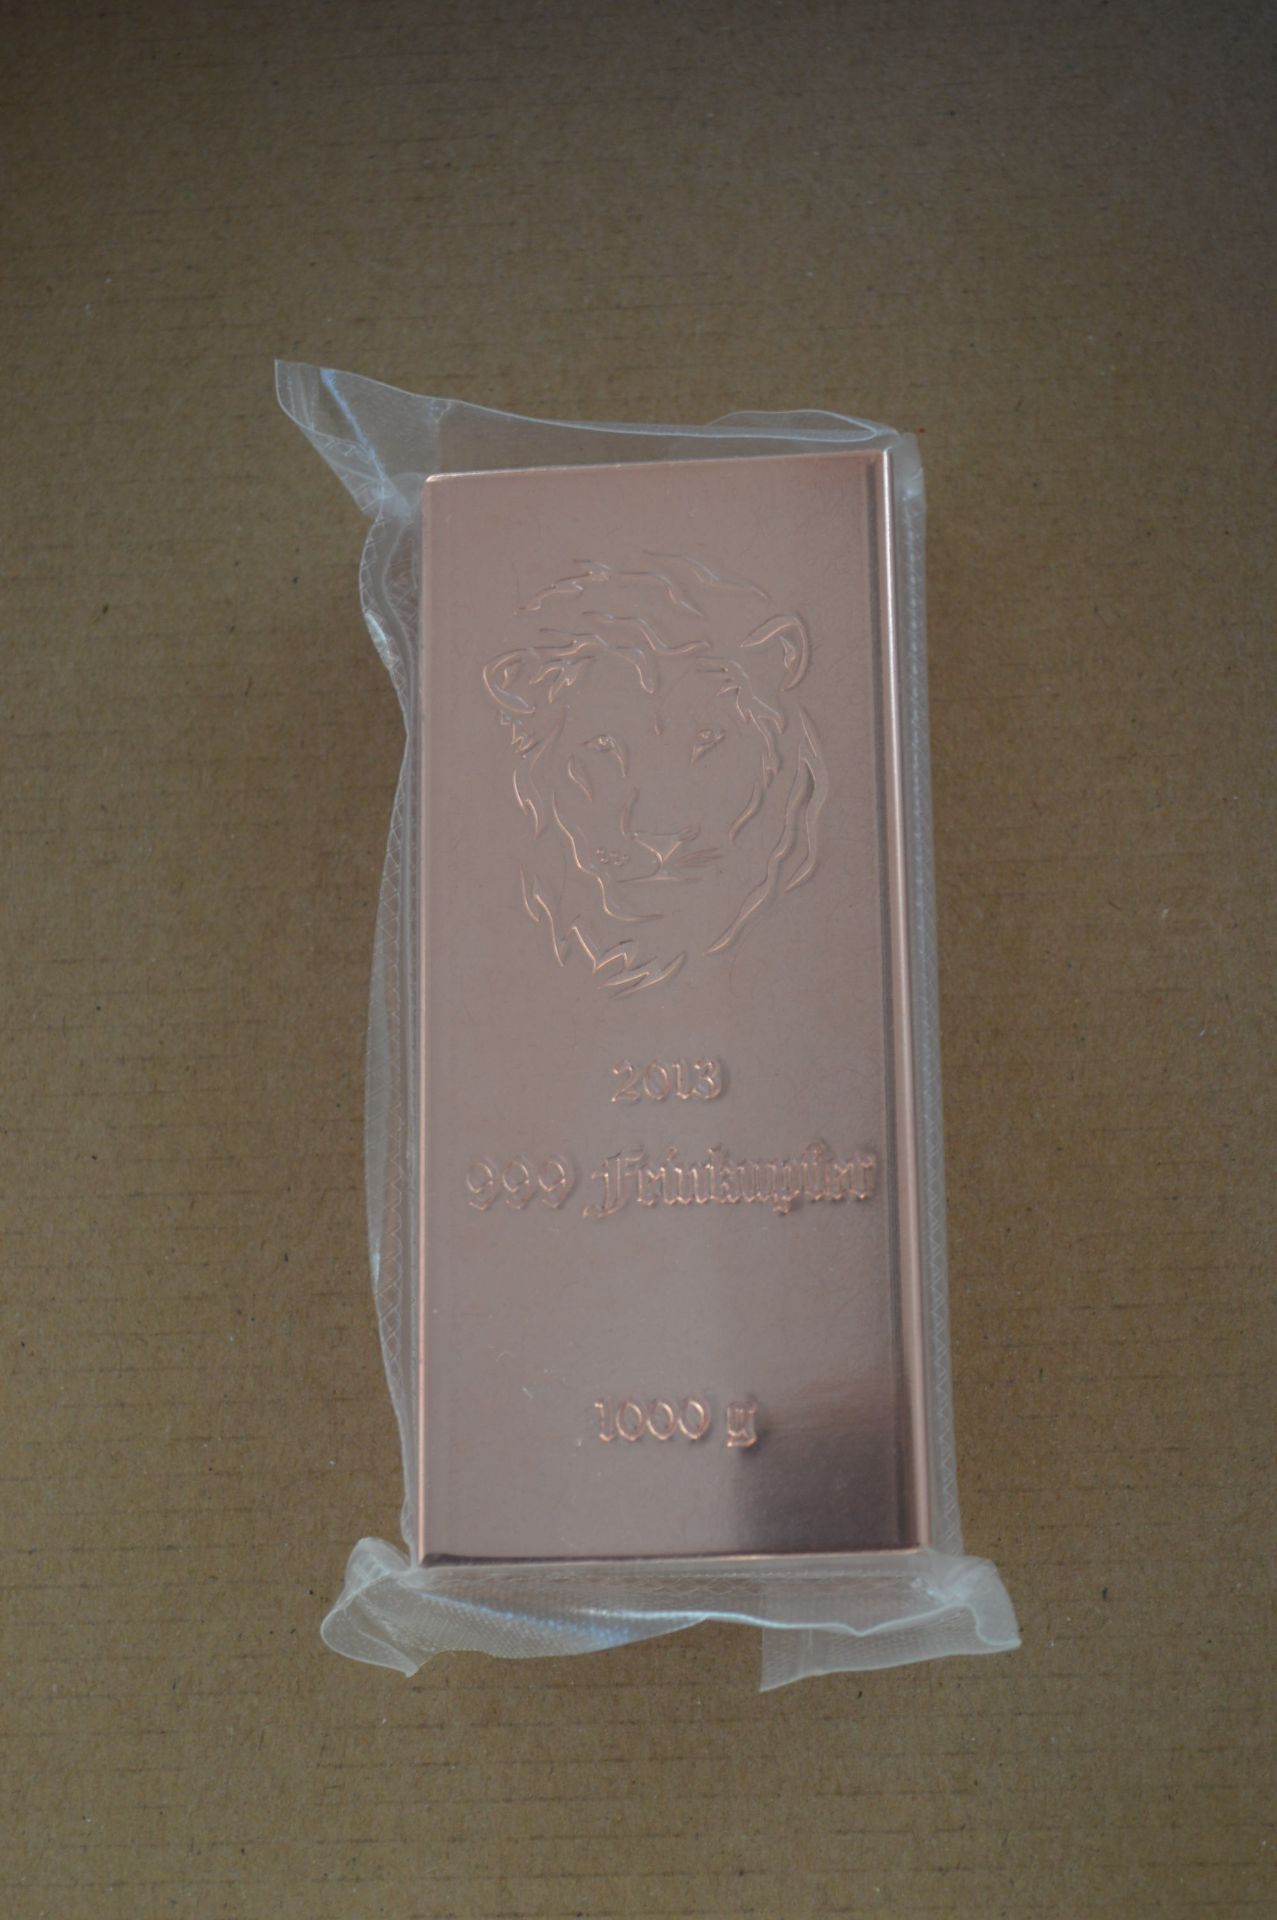 PURE COPPER BULLION .999 = 99.9% pure 1kg lots, INVESTMENT QUALITY WITH LION FACE!